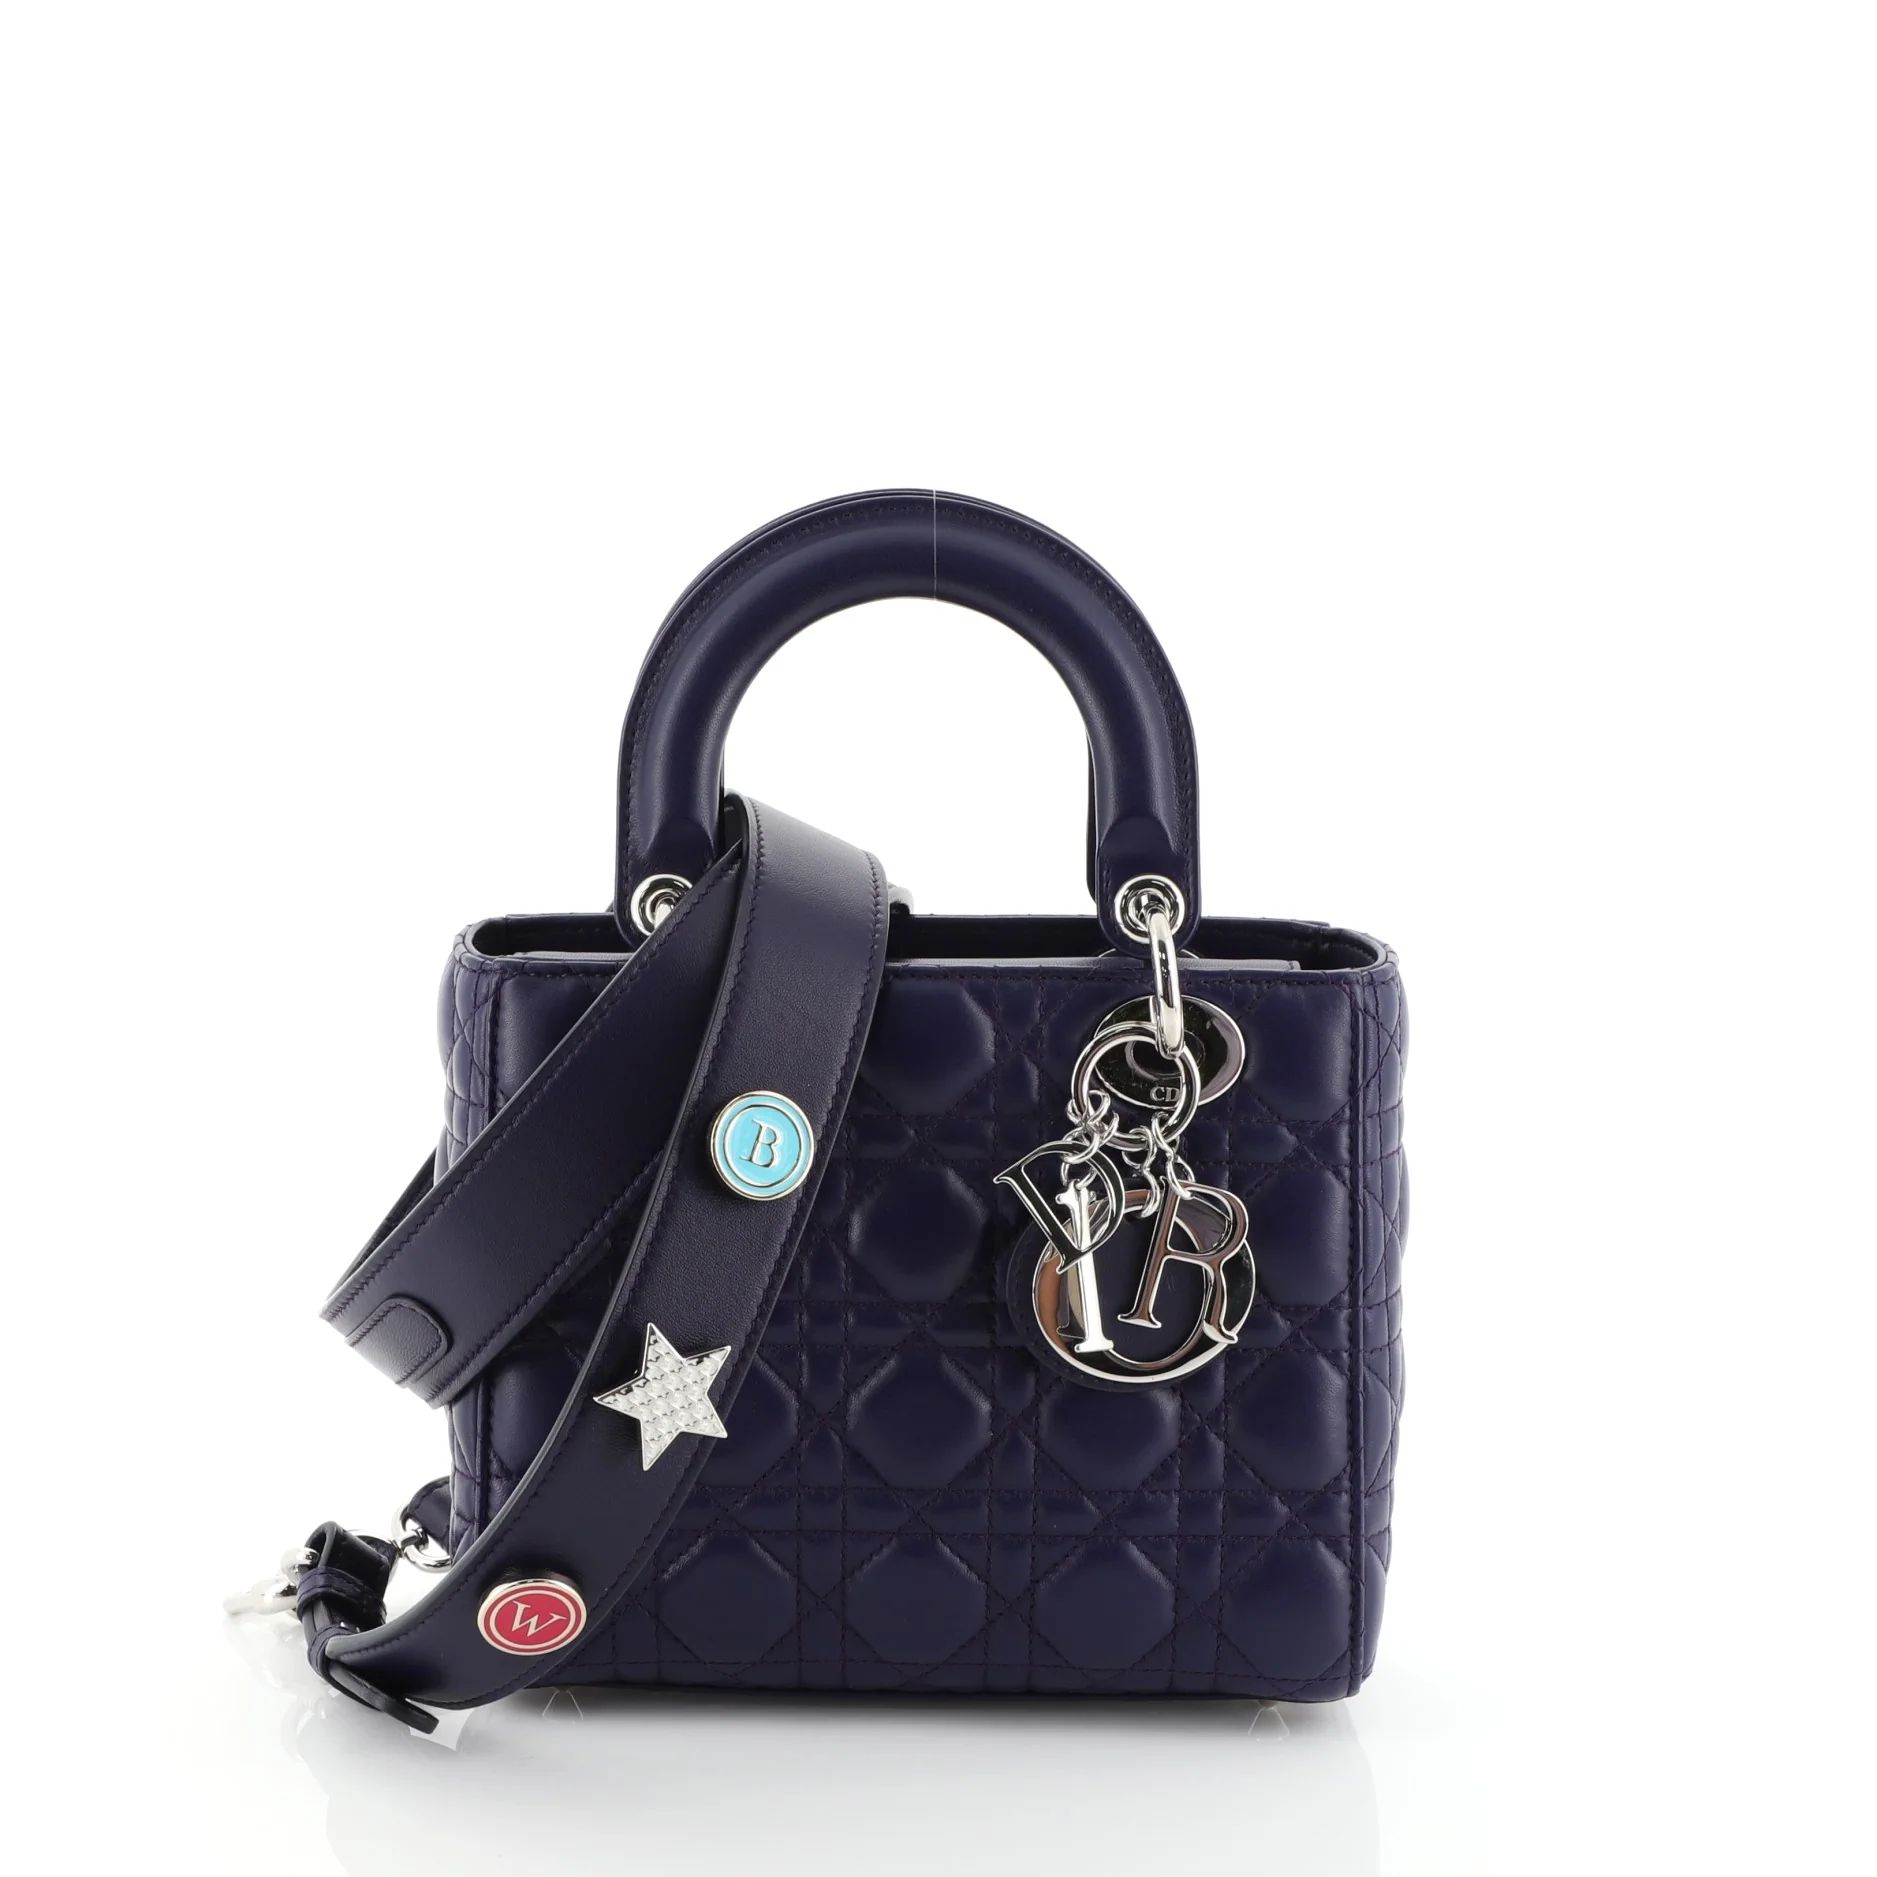 My Lady Dior Bag Cannage Quilt Lambskin | Rebag